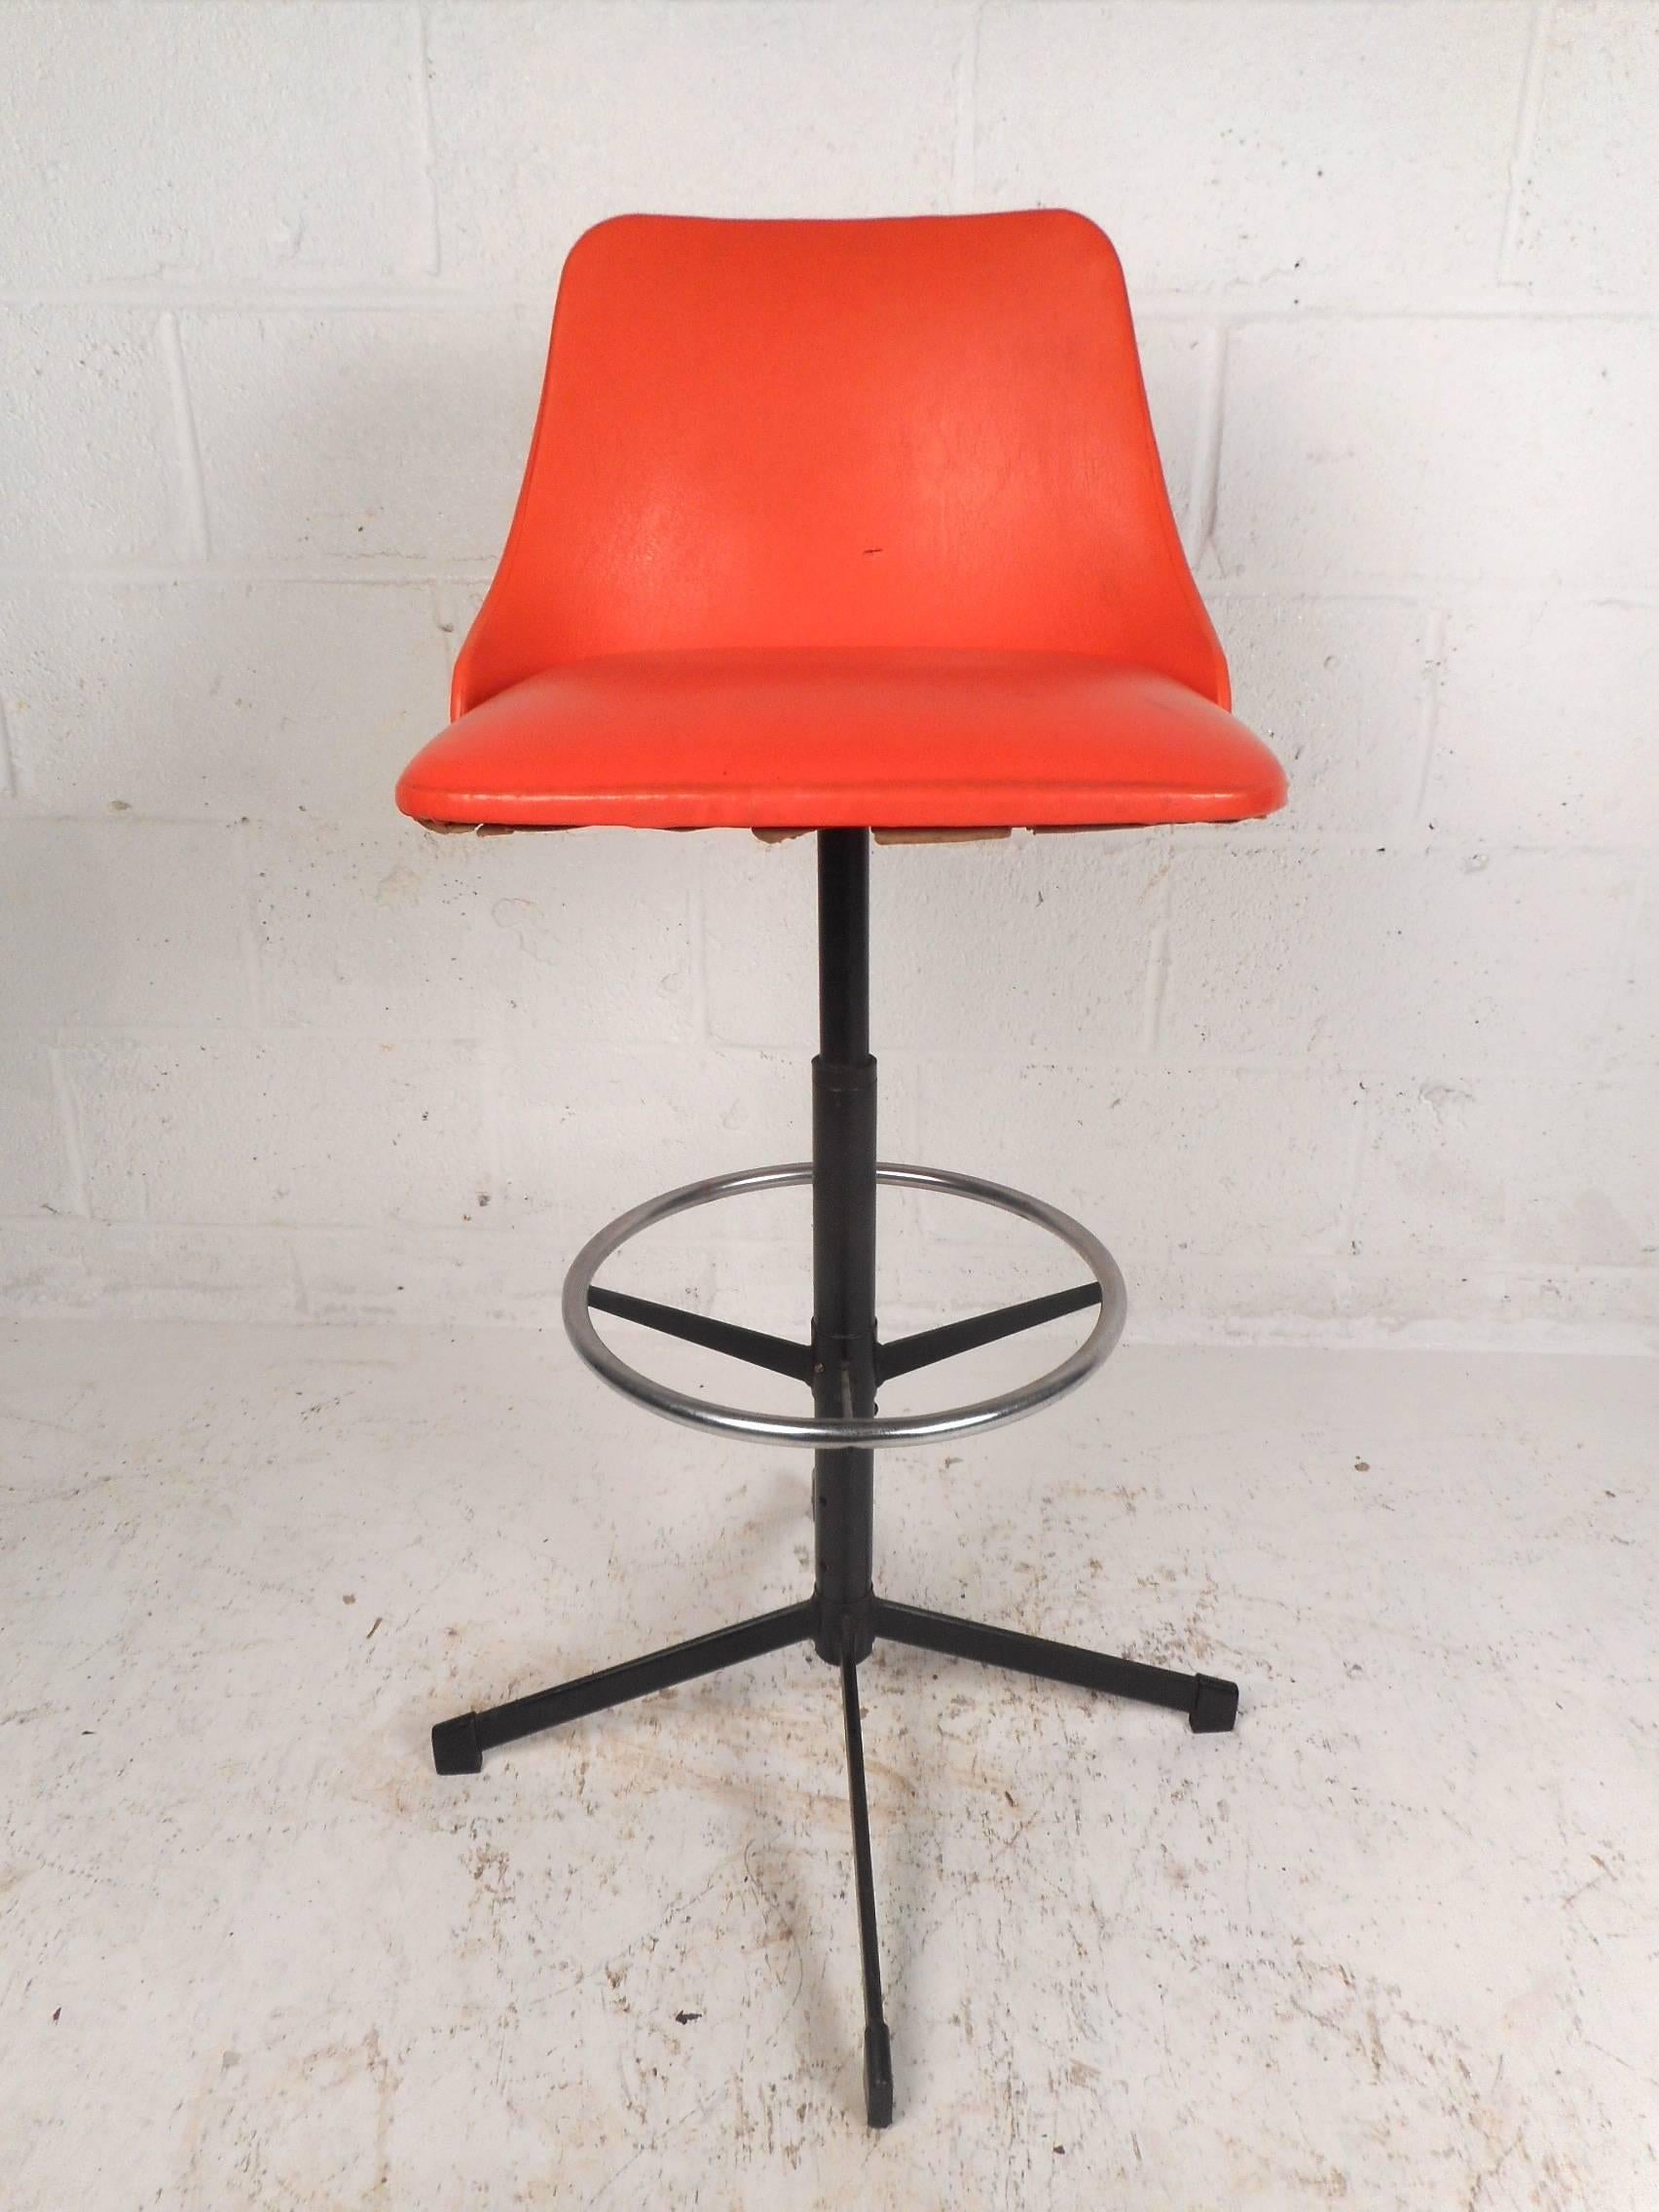 Stunning set of four vintage modern bar stools with orange vinyl covered seats and a sturdy metal base. Sleek design features a unique back rest with thick padded seats and a circular kick rest for convenience. The two-tone base and the splayed legs